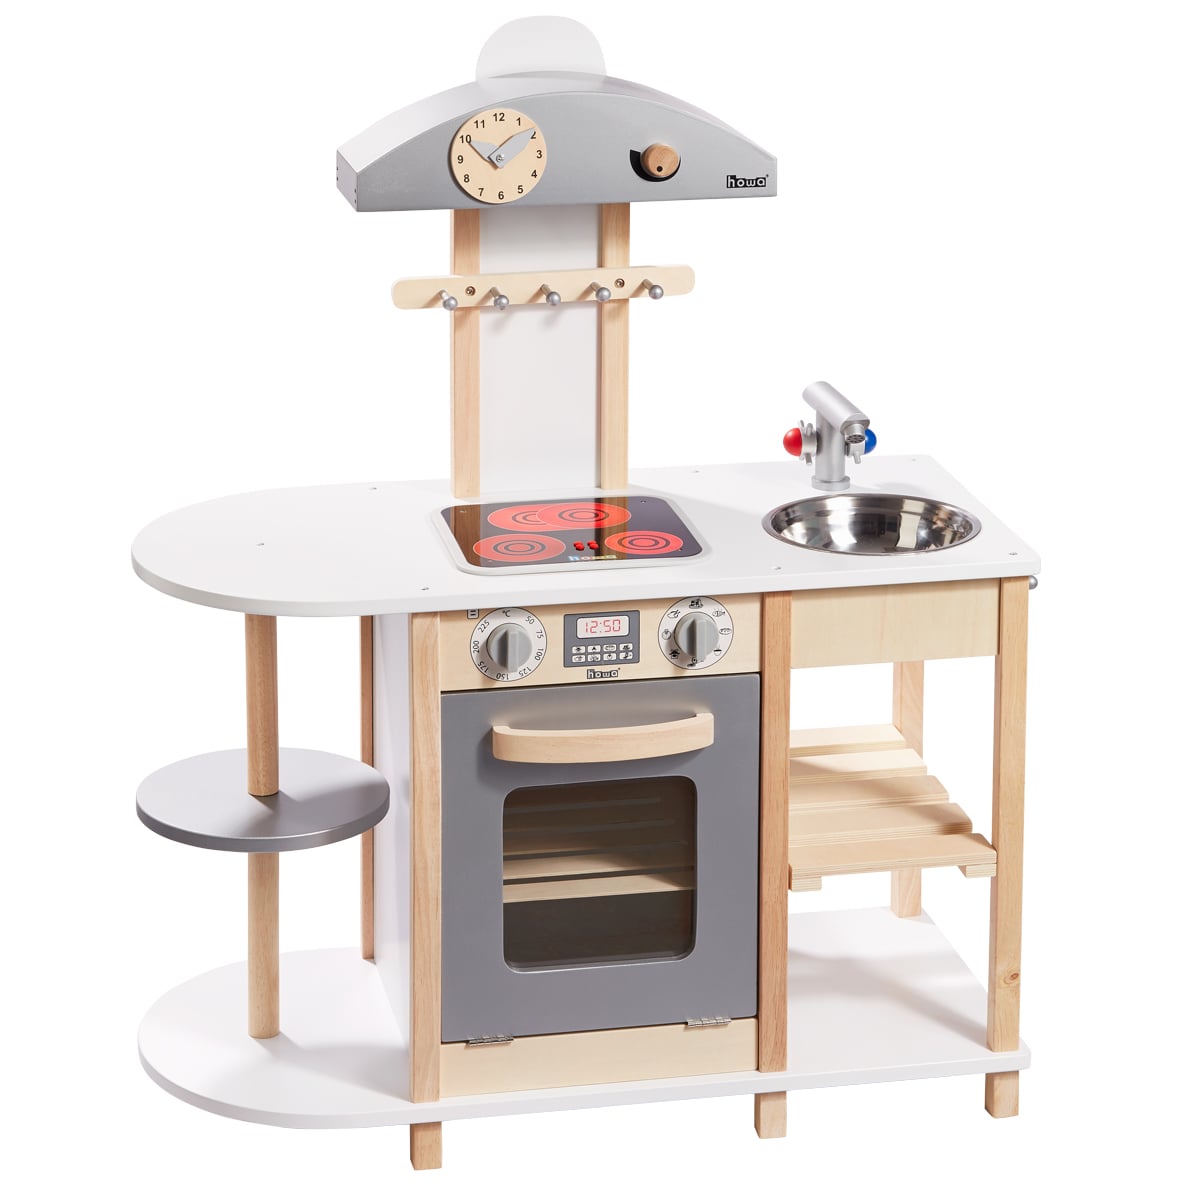 howa wooden toy kitchen Chefkoch nature white with LED hob natural white  4820